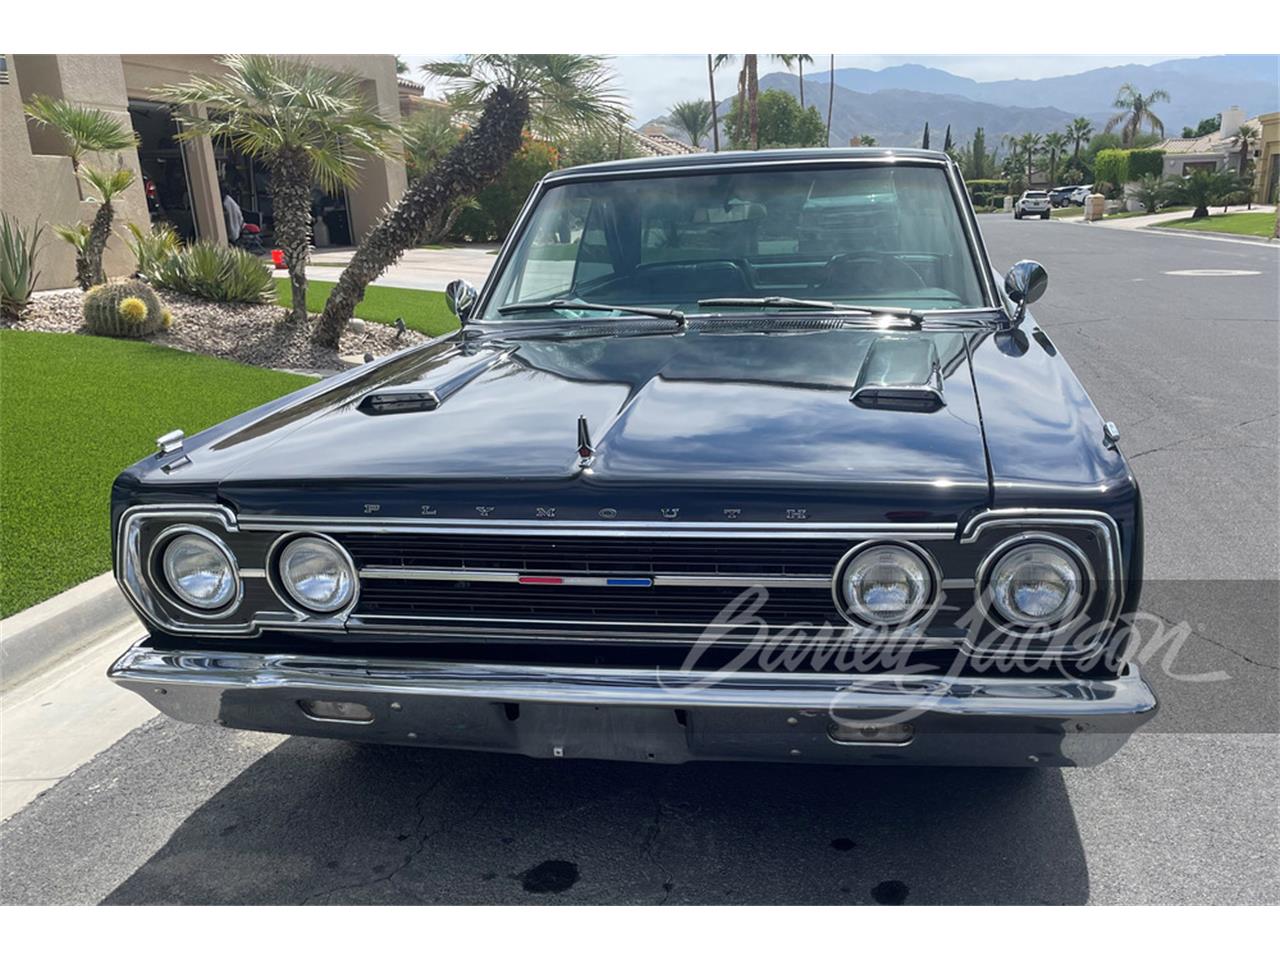 For Sale at Auction: 1967 Plymouth Satellite in Scottsdale, Arizona for sale in Scottsdale, AZ